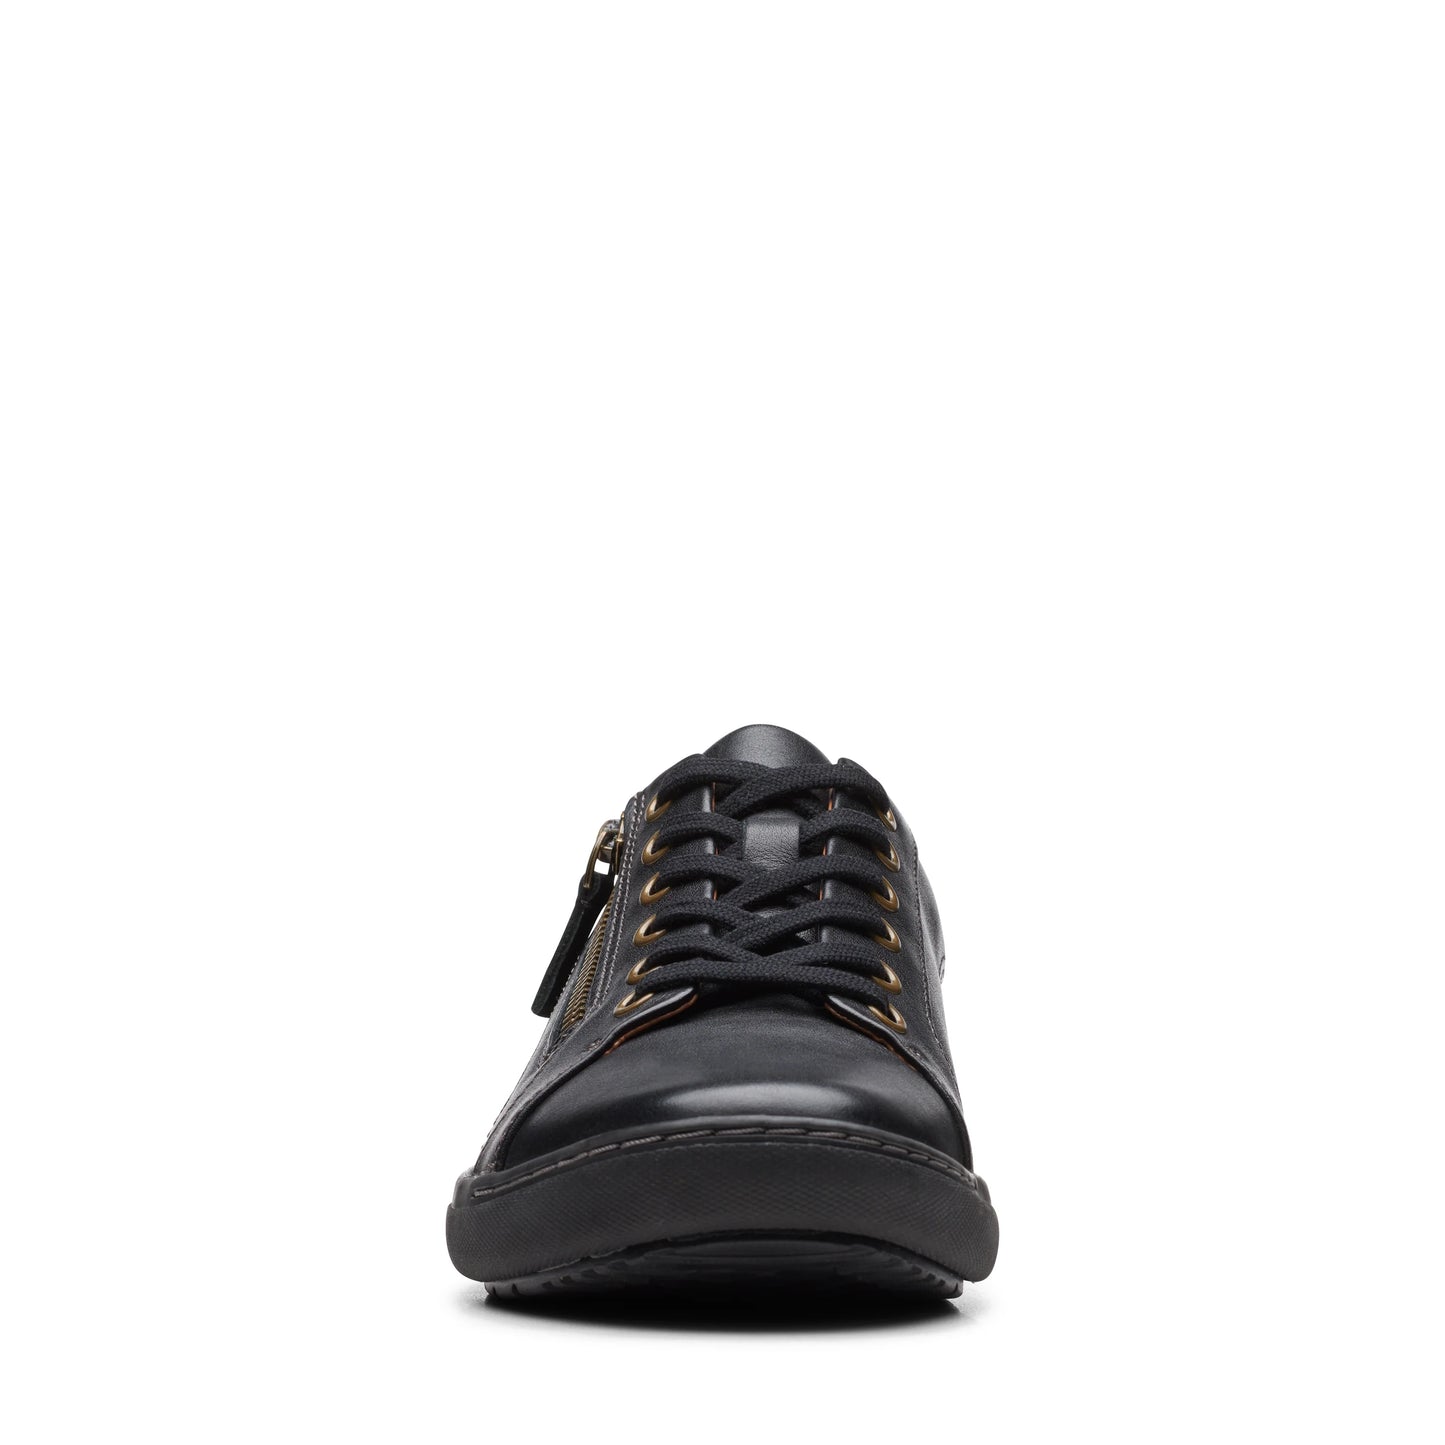 CLARKS | ZAPATOS DERBY MUJER | NALLE LACE BLACK/BLACK | NEGRO